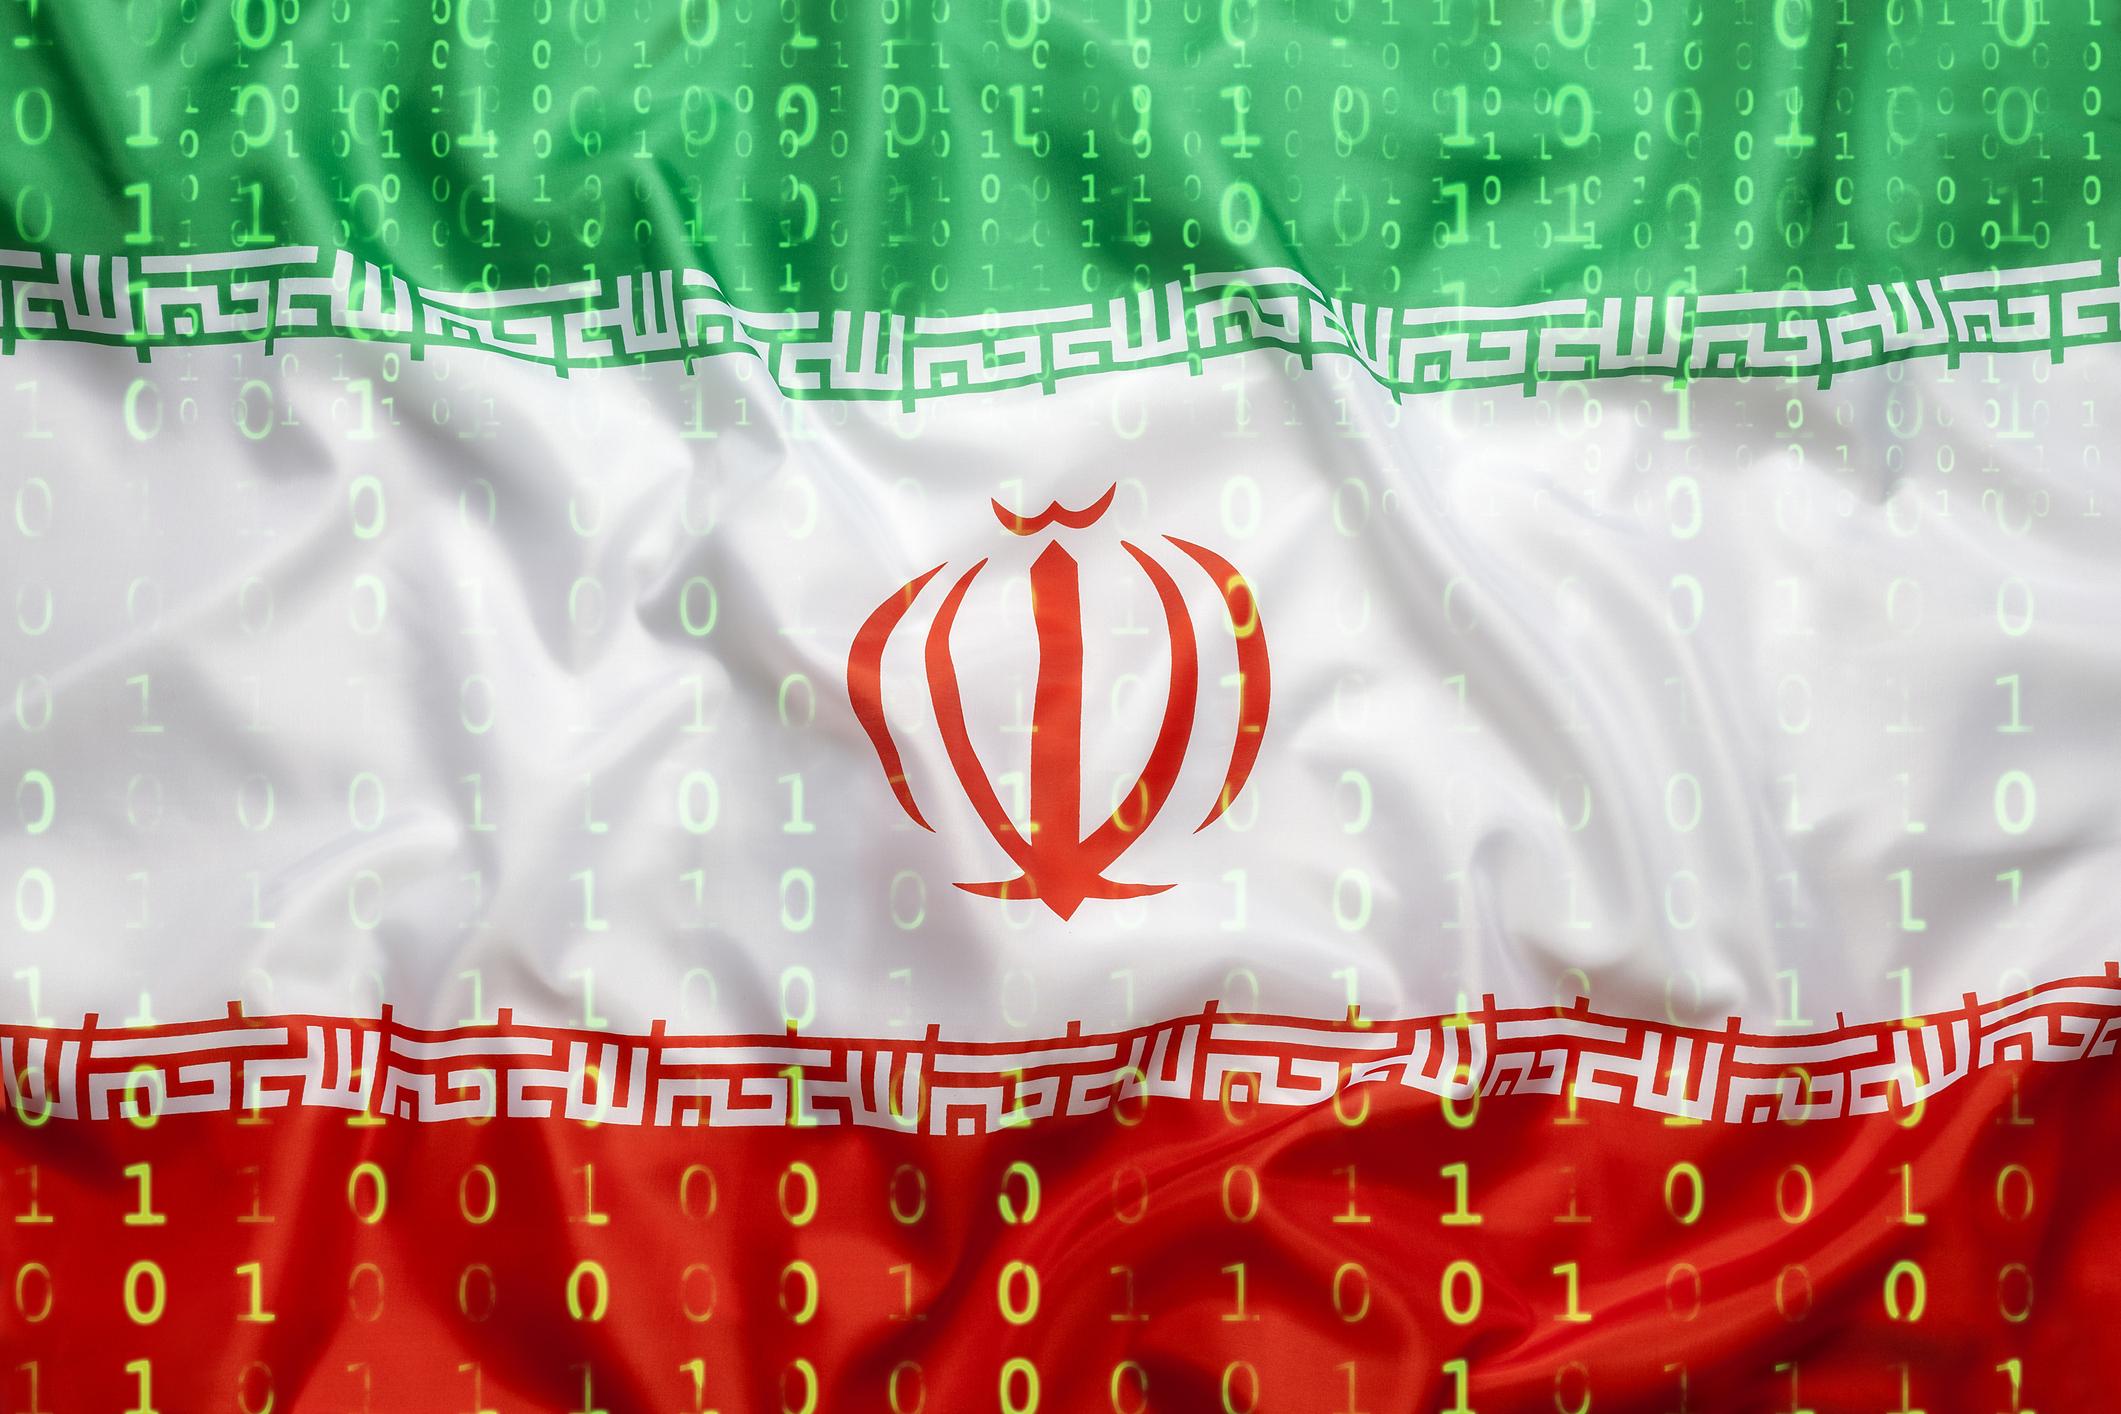 Iran-based hackers targeted 76 universities located in 14 countries, including Australia, Canada, China, Israel, Japan, Switzerland, Turkey, the United Kingdom, and the United States